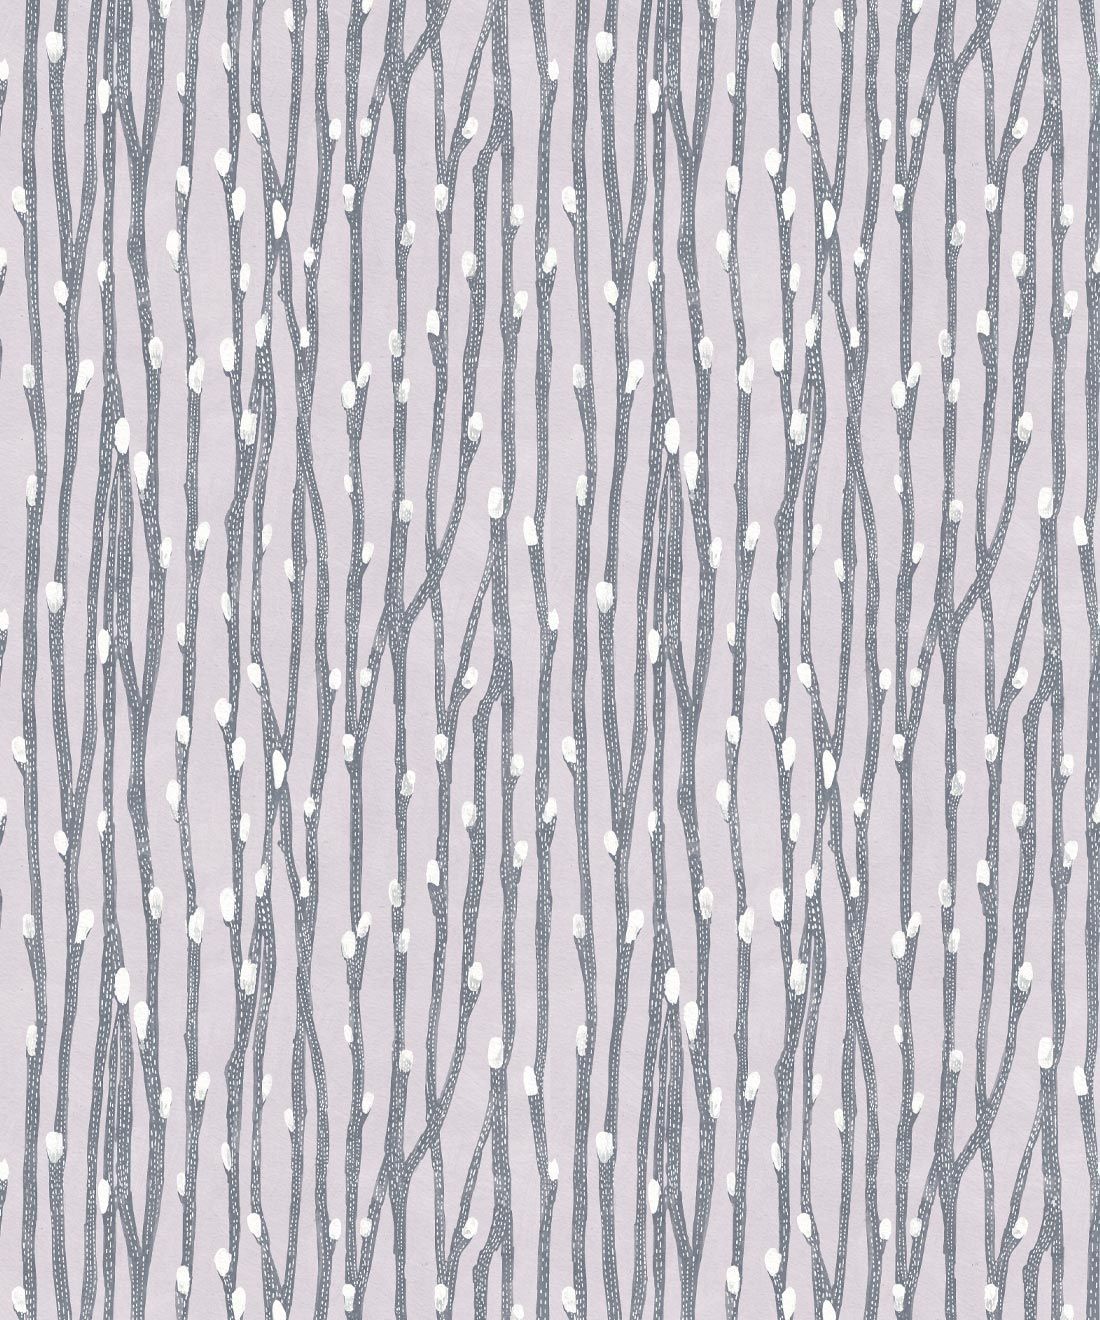 Pussy Willow Wallpaper • Floral Wallpaper • Gray • Swatch